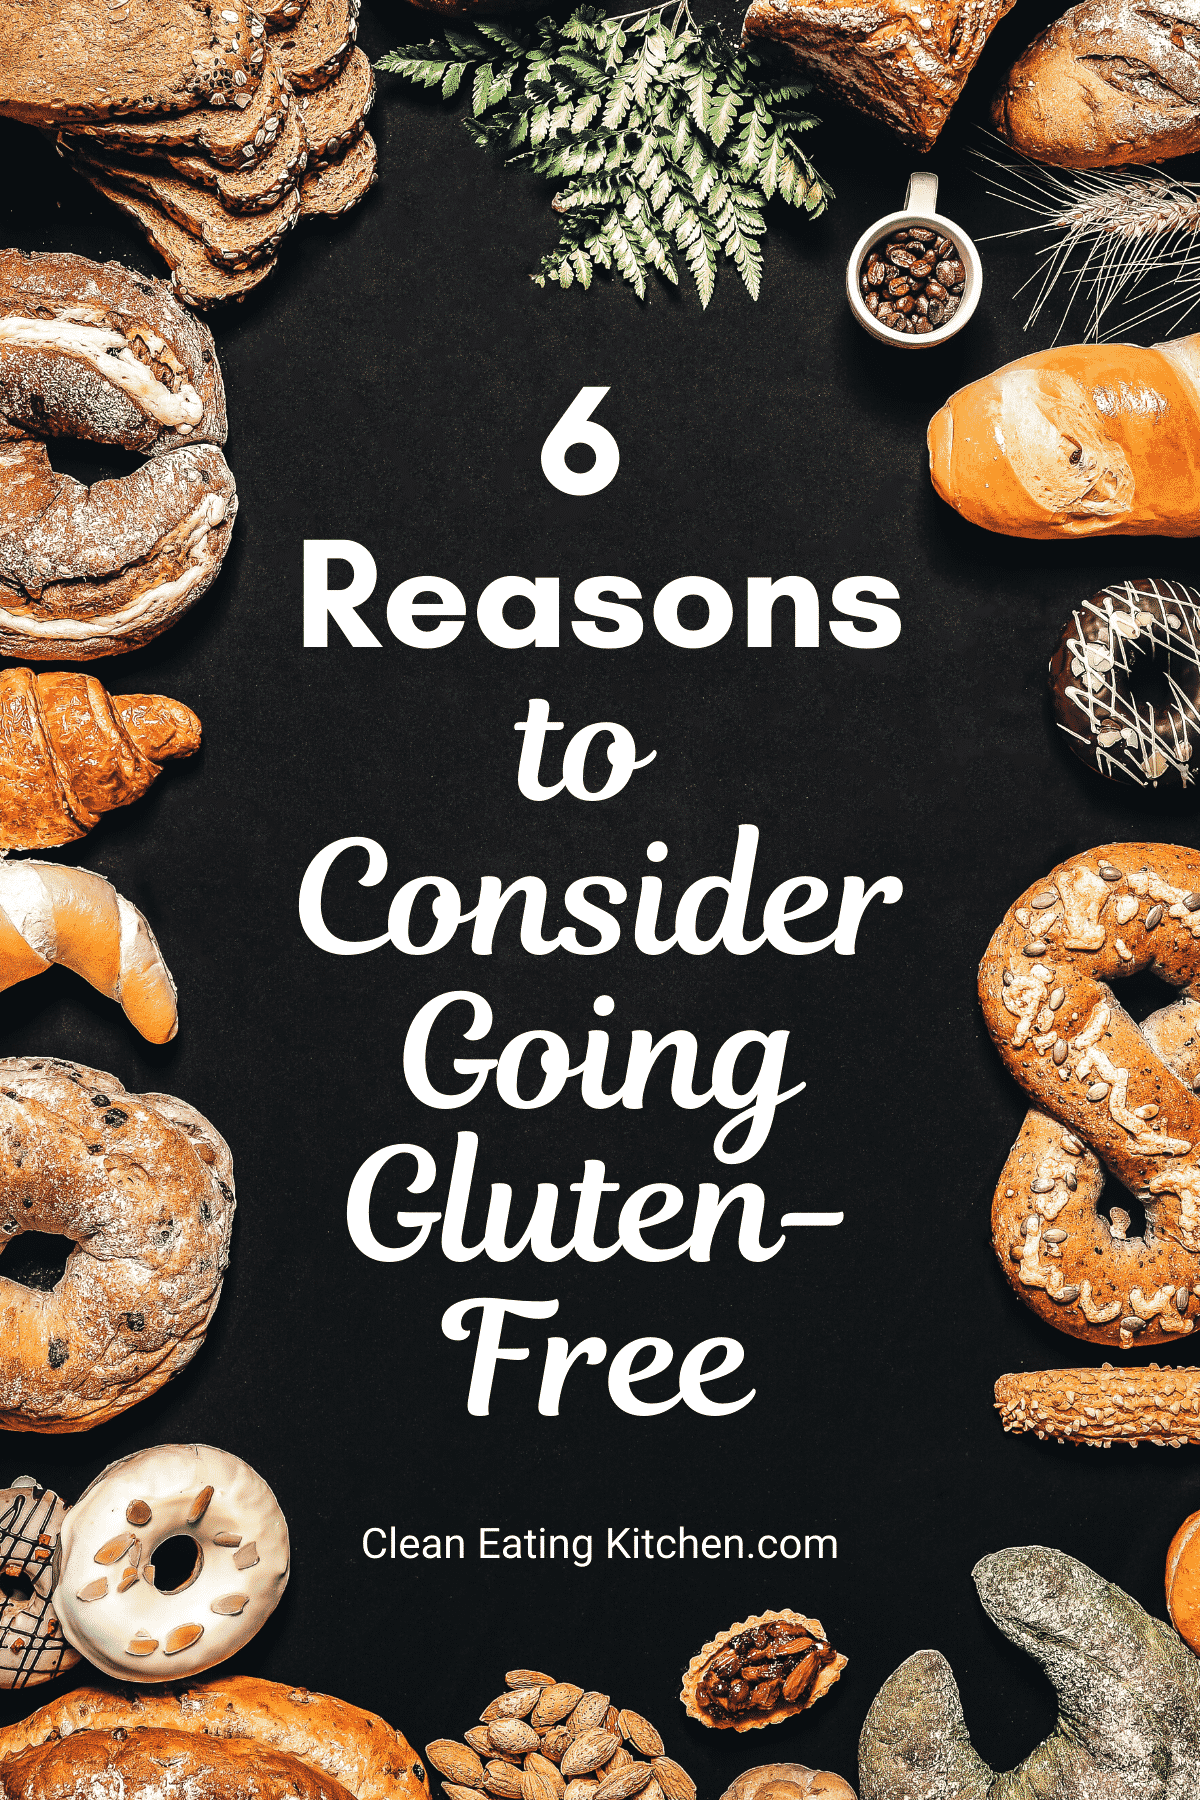 reasons to go gluten free image.